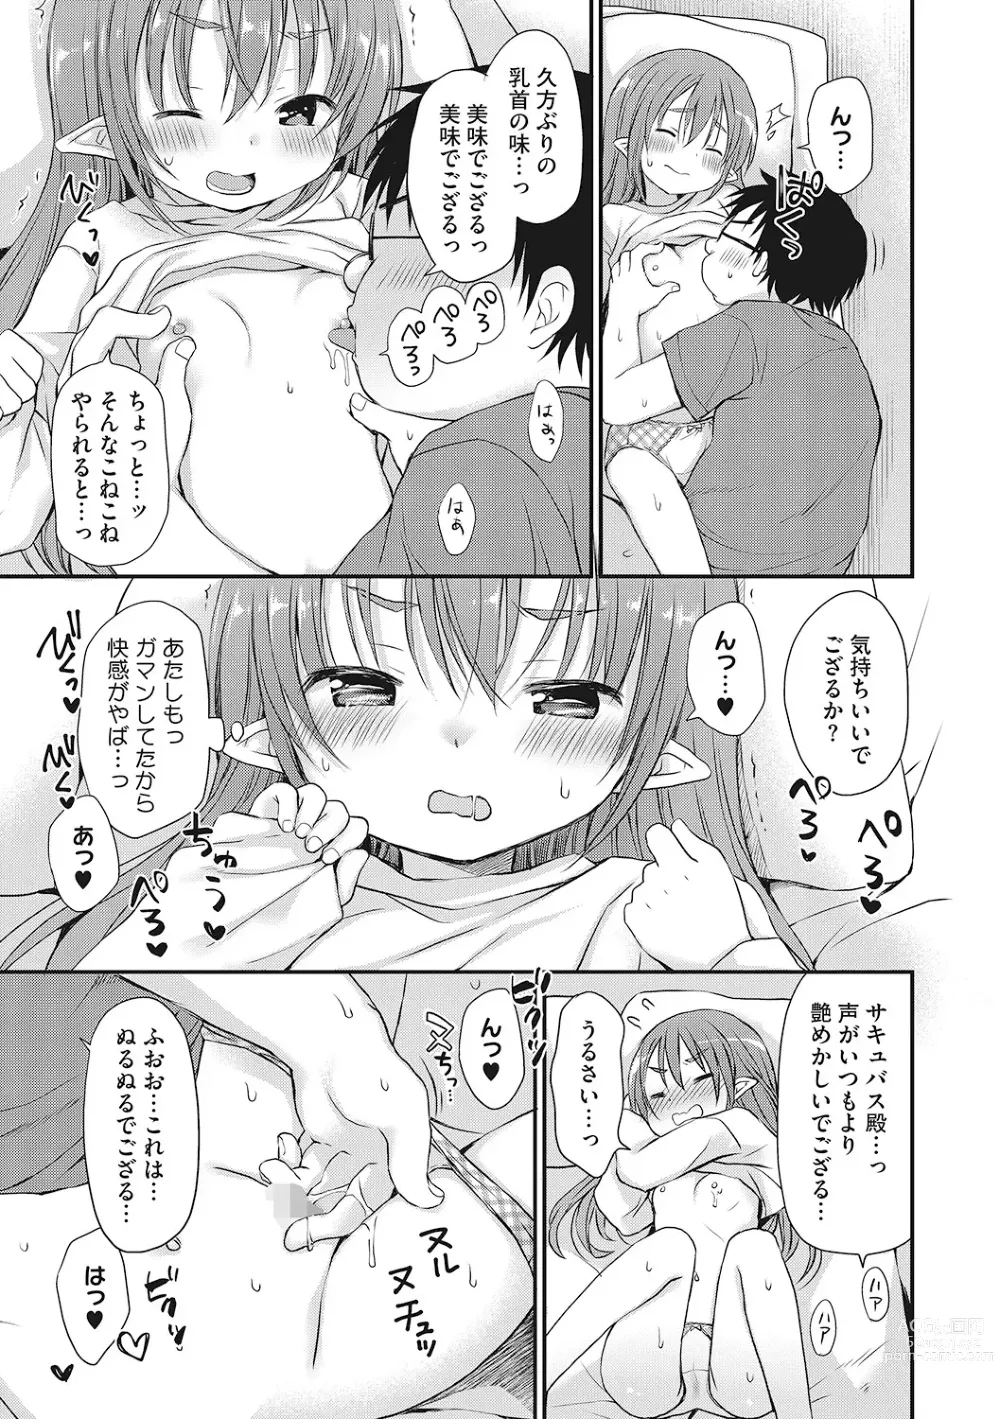 Page 24 of manga LQ -Little Queen- Vol. 53